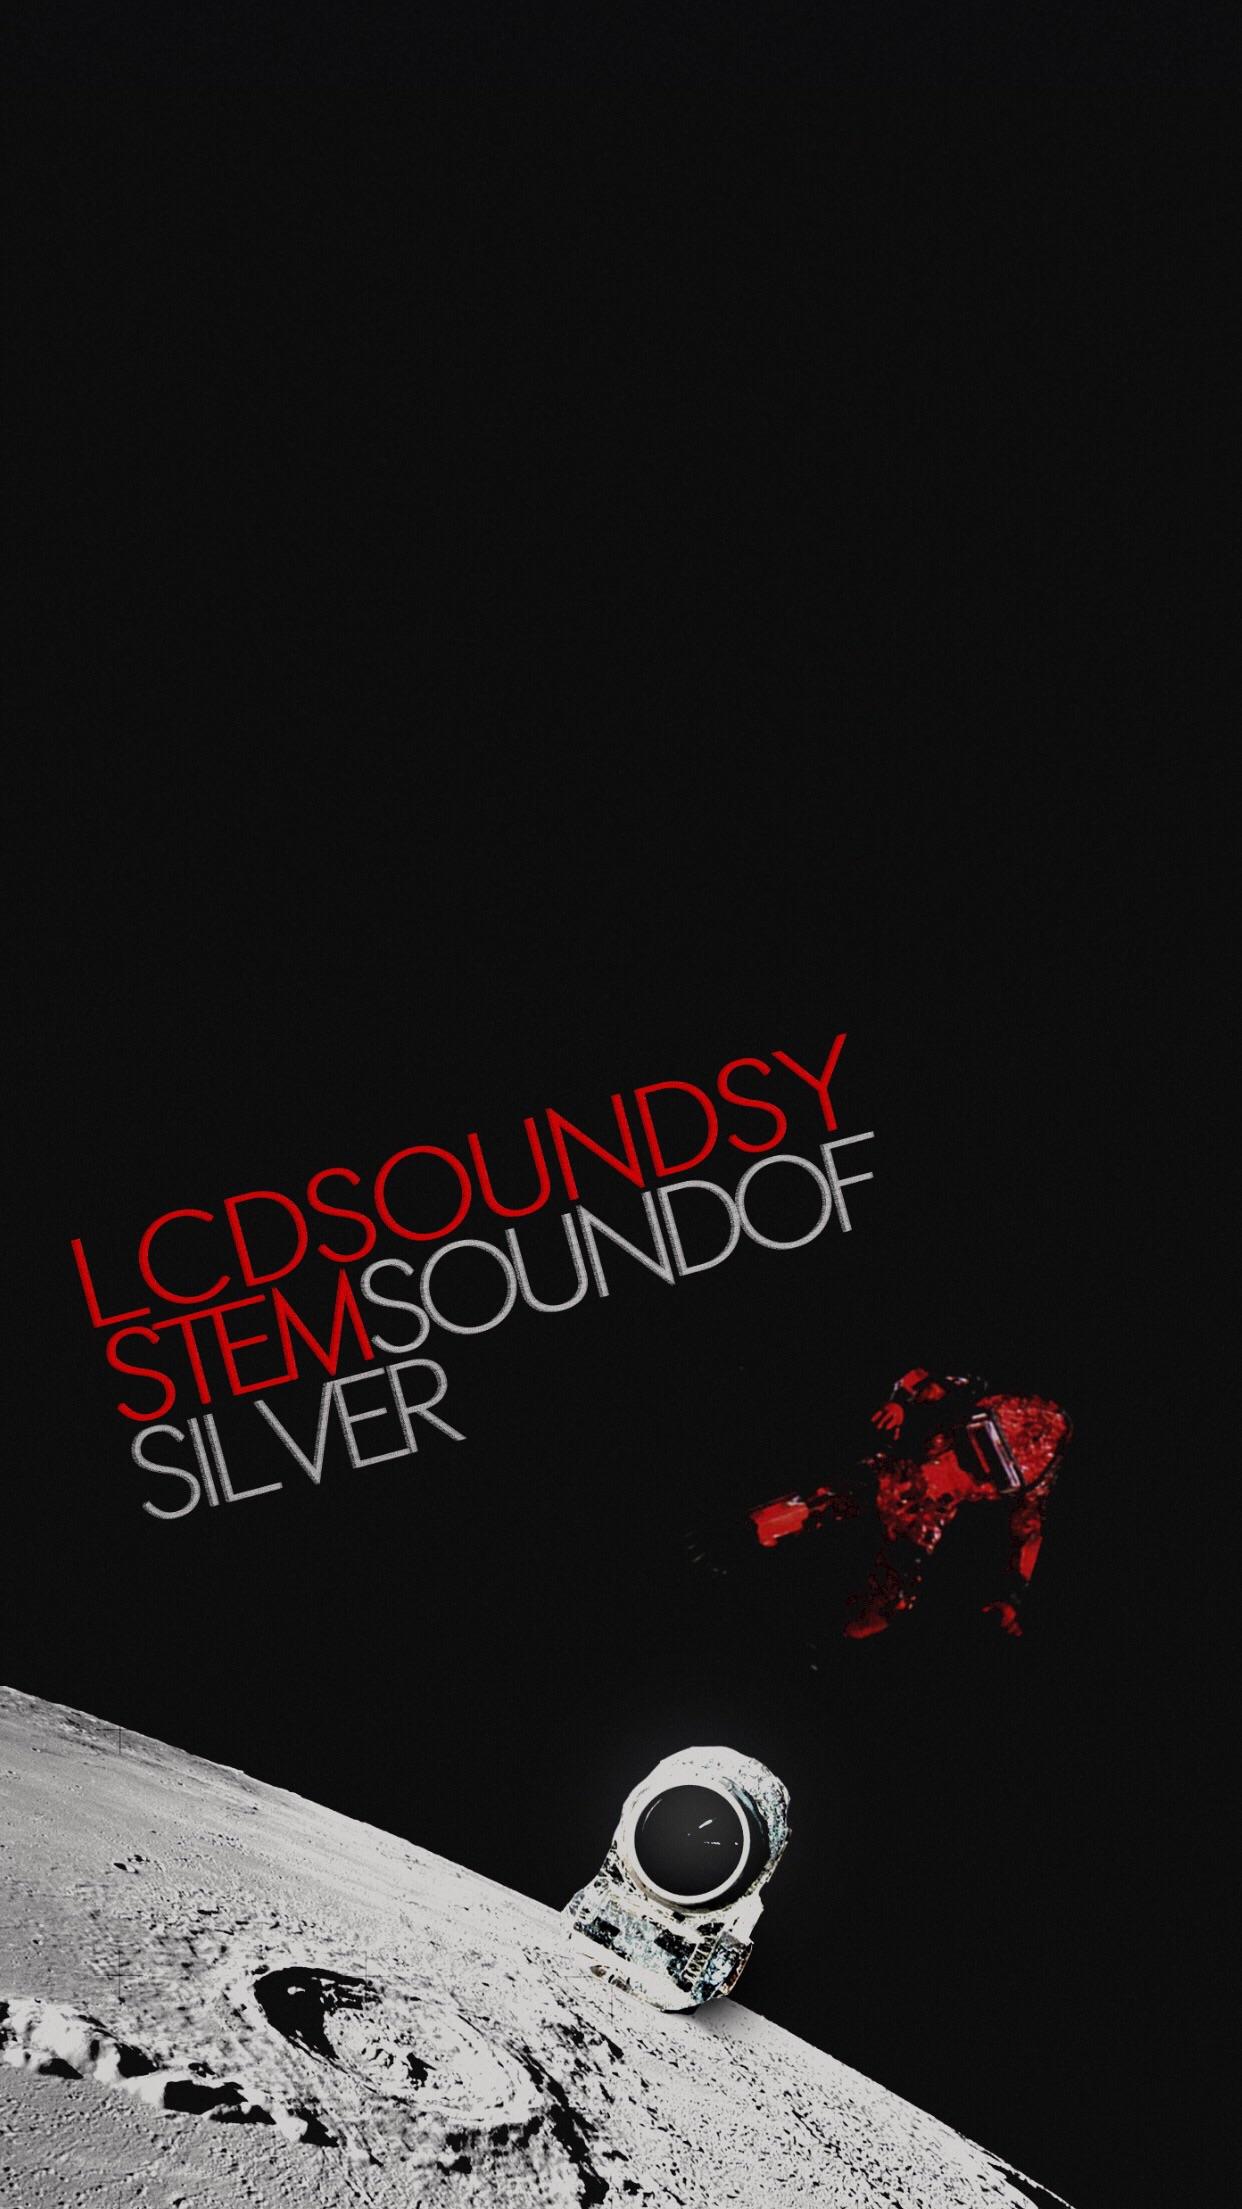 Here's A Wallpaper I Made Out Of An Image U OneOfTheOnly Made: LCDSoundsystem